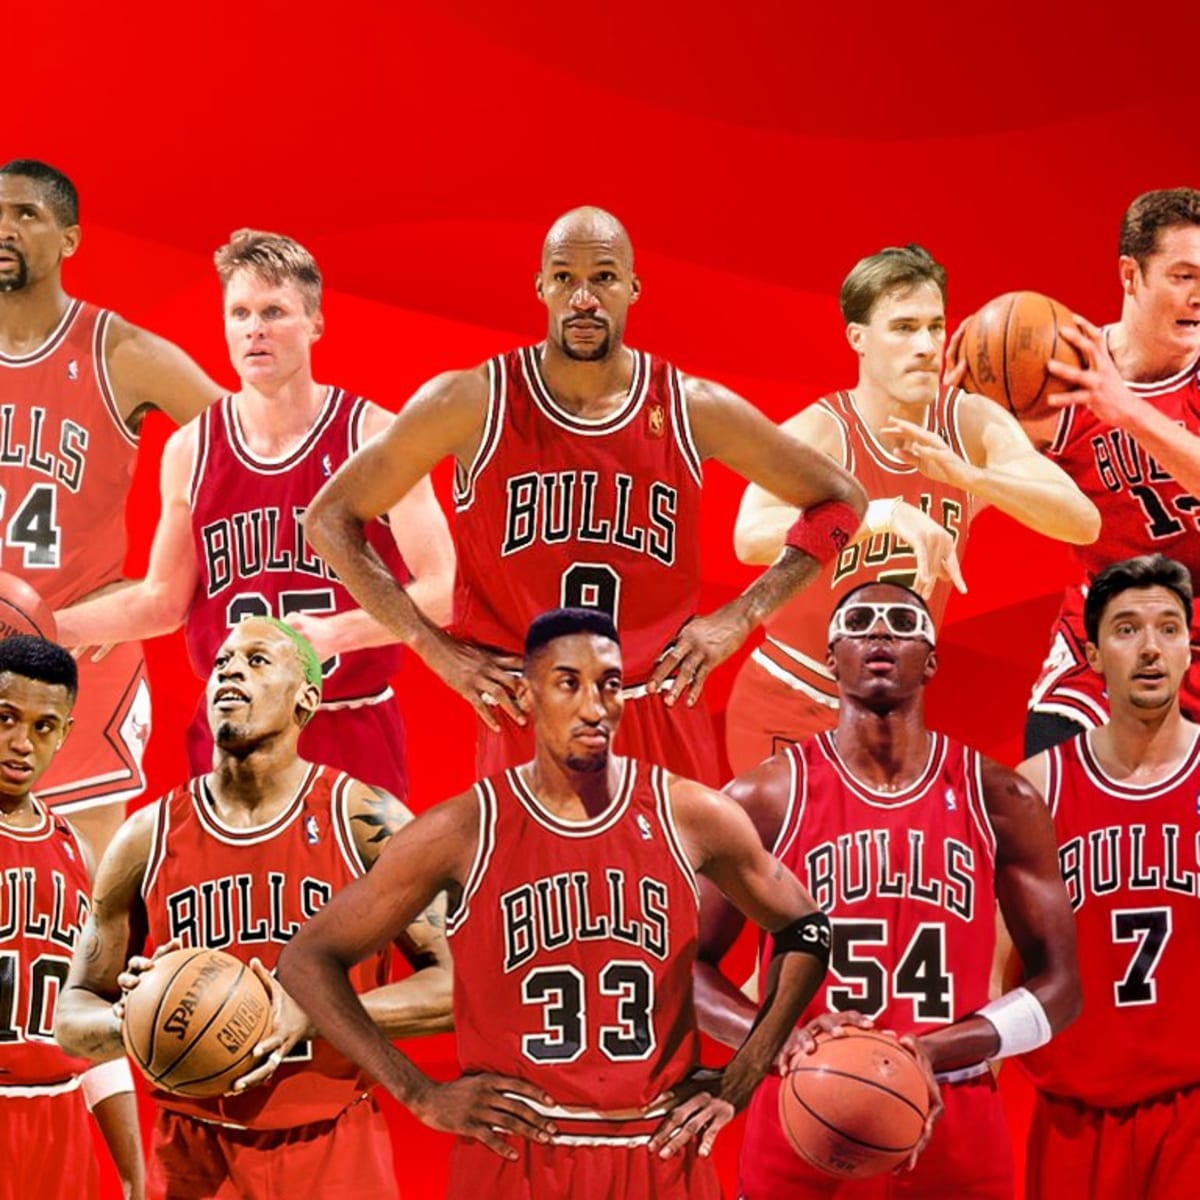 25 years after the shot of his life, John Paxson still wants more. But can  he bring the Bulls back to greatness? - The Athletic